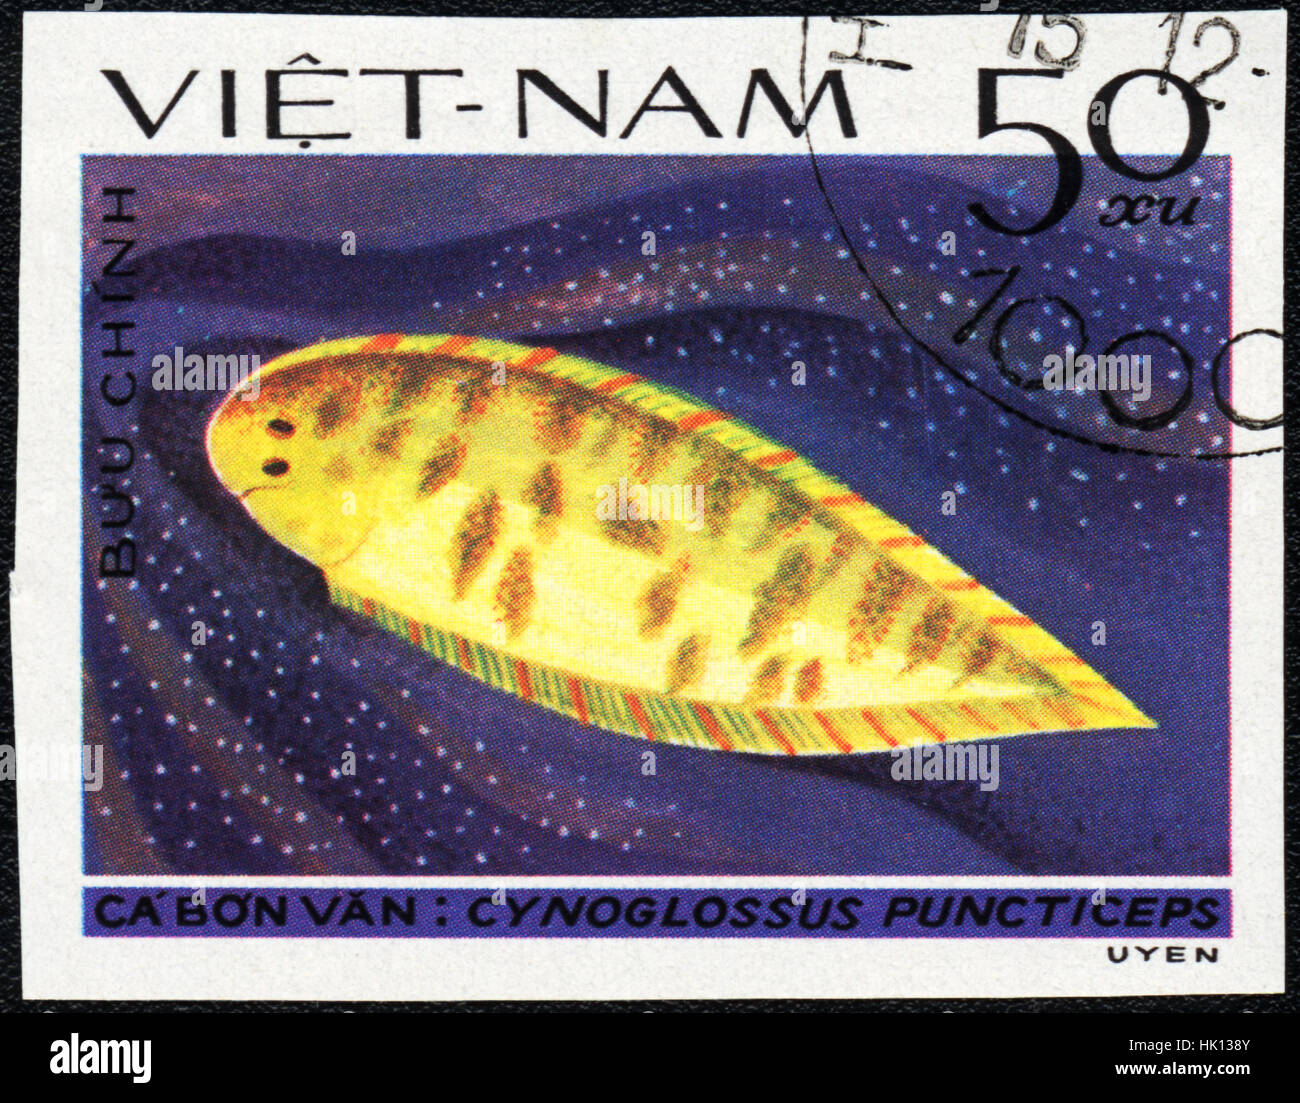 A postage stamp printed in VIETNAM shows a Fish Cynoglossus puncticeps,  series 'Flatfish', circa 1982 Stock Photo